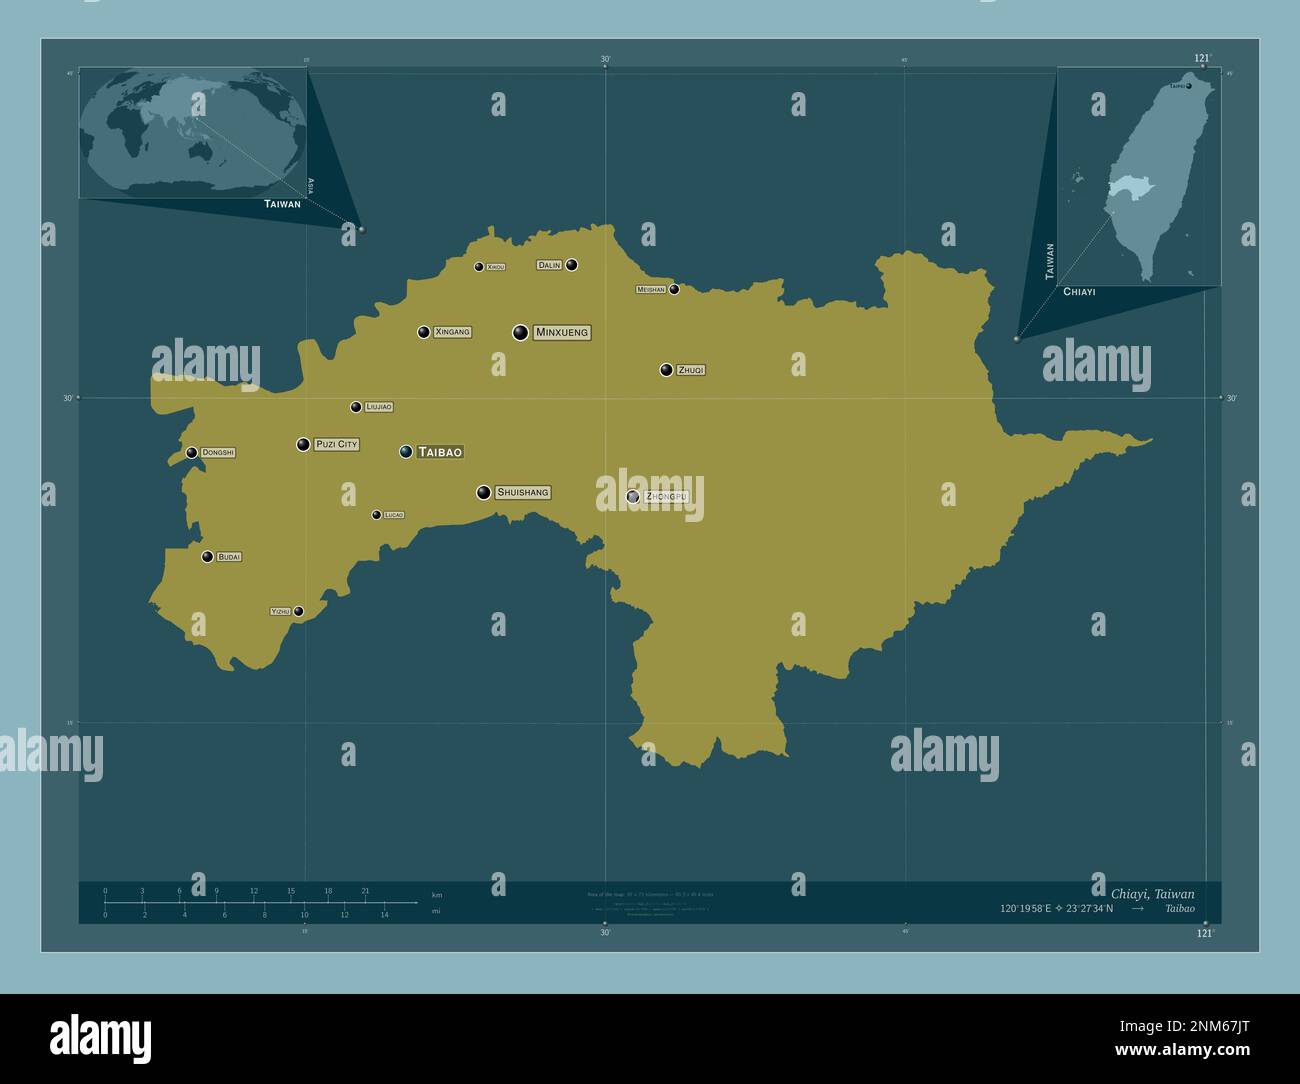 Chiayi, county of Taiwan. Solid color shape. Locations and names of major cities of the region. Corner auxiliary location maps Stock Photo